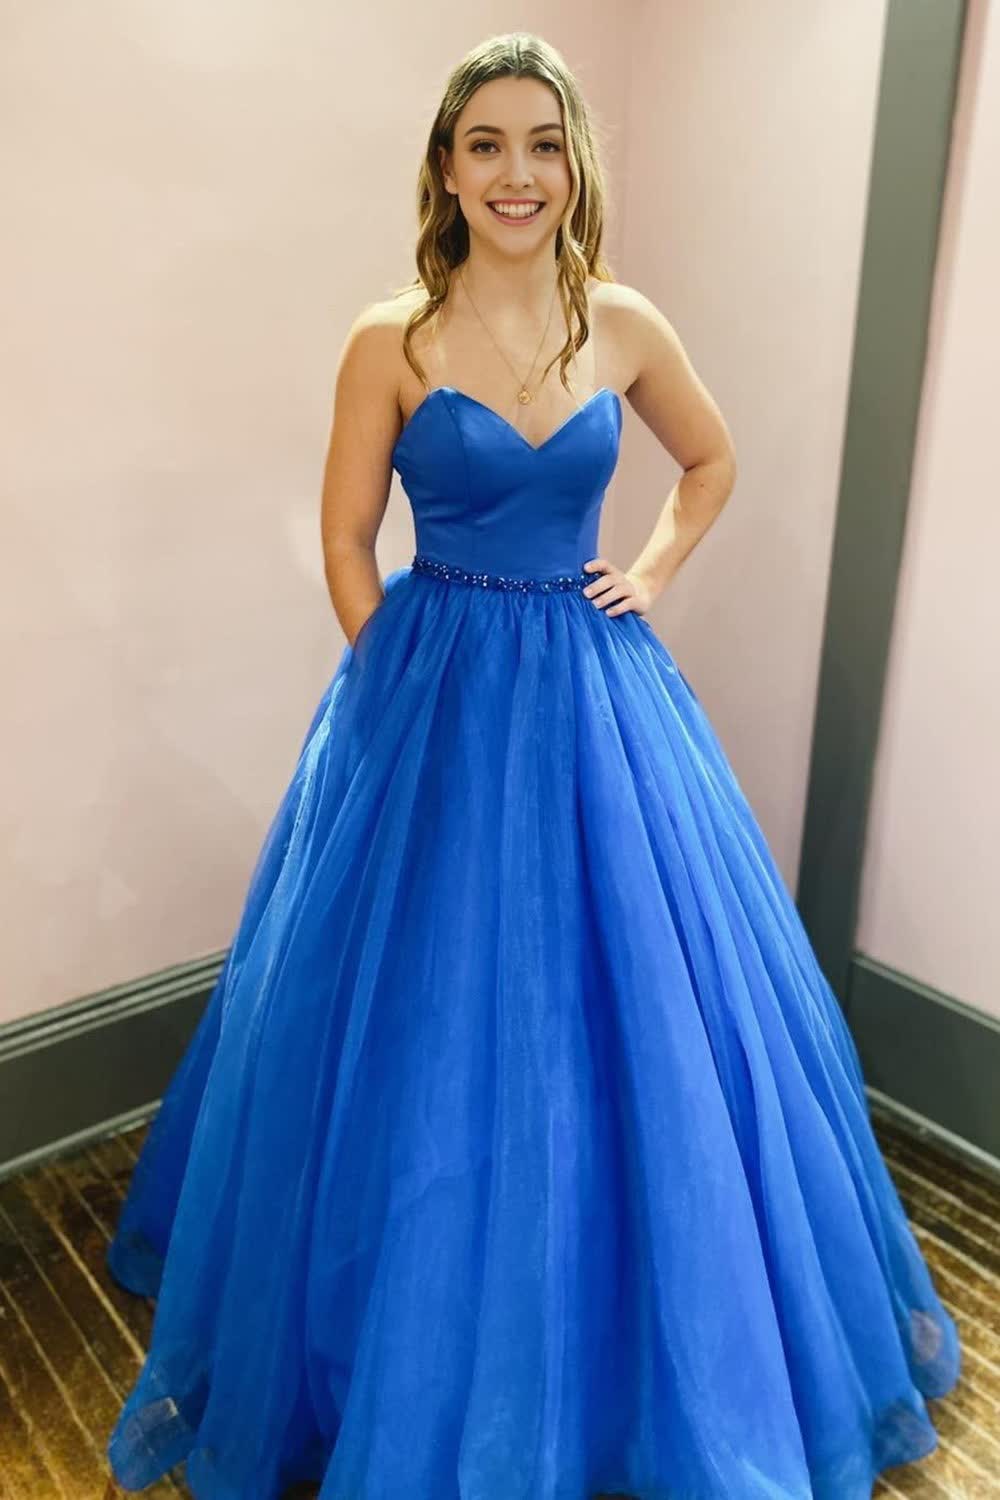 A Line Sweetheart Royal Blue Long Prom Dress with Beading and Pockets